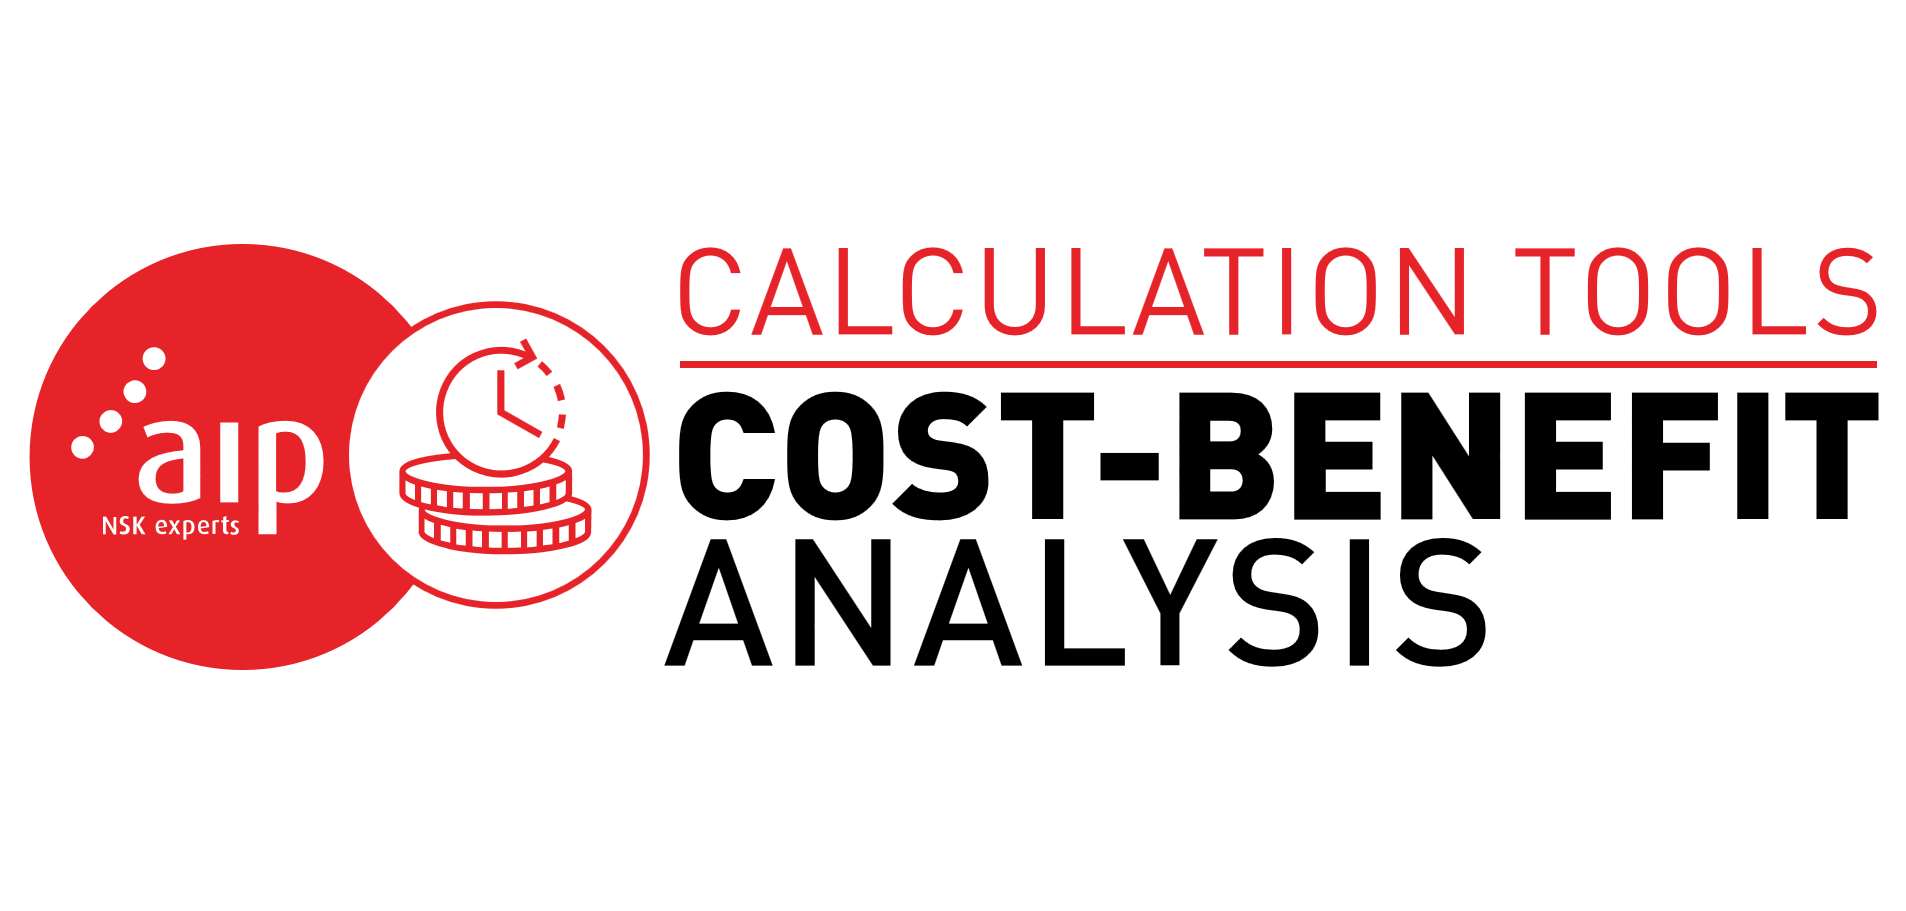 NSK Cost-Benefit Analysis